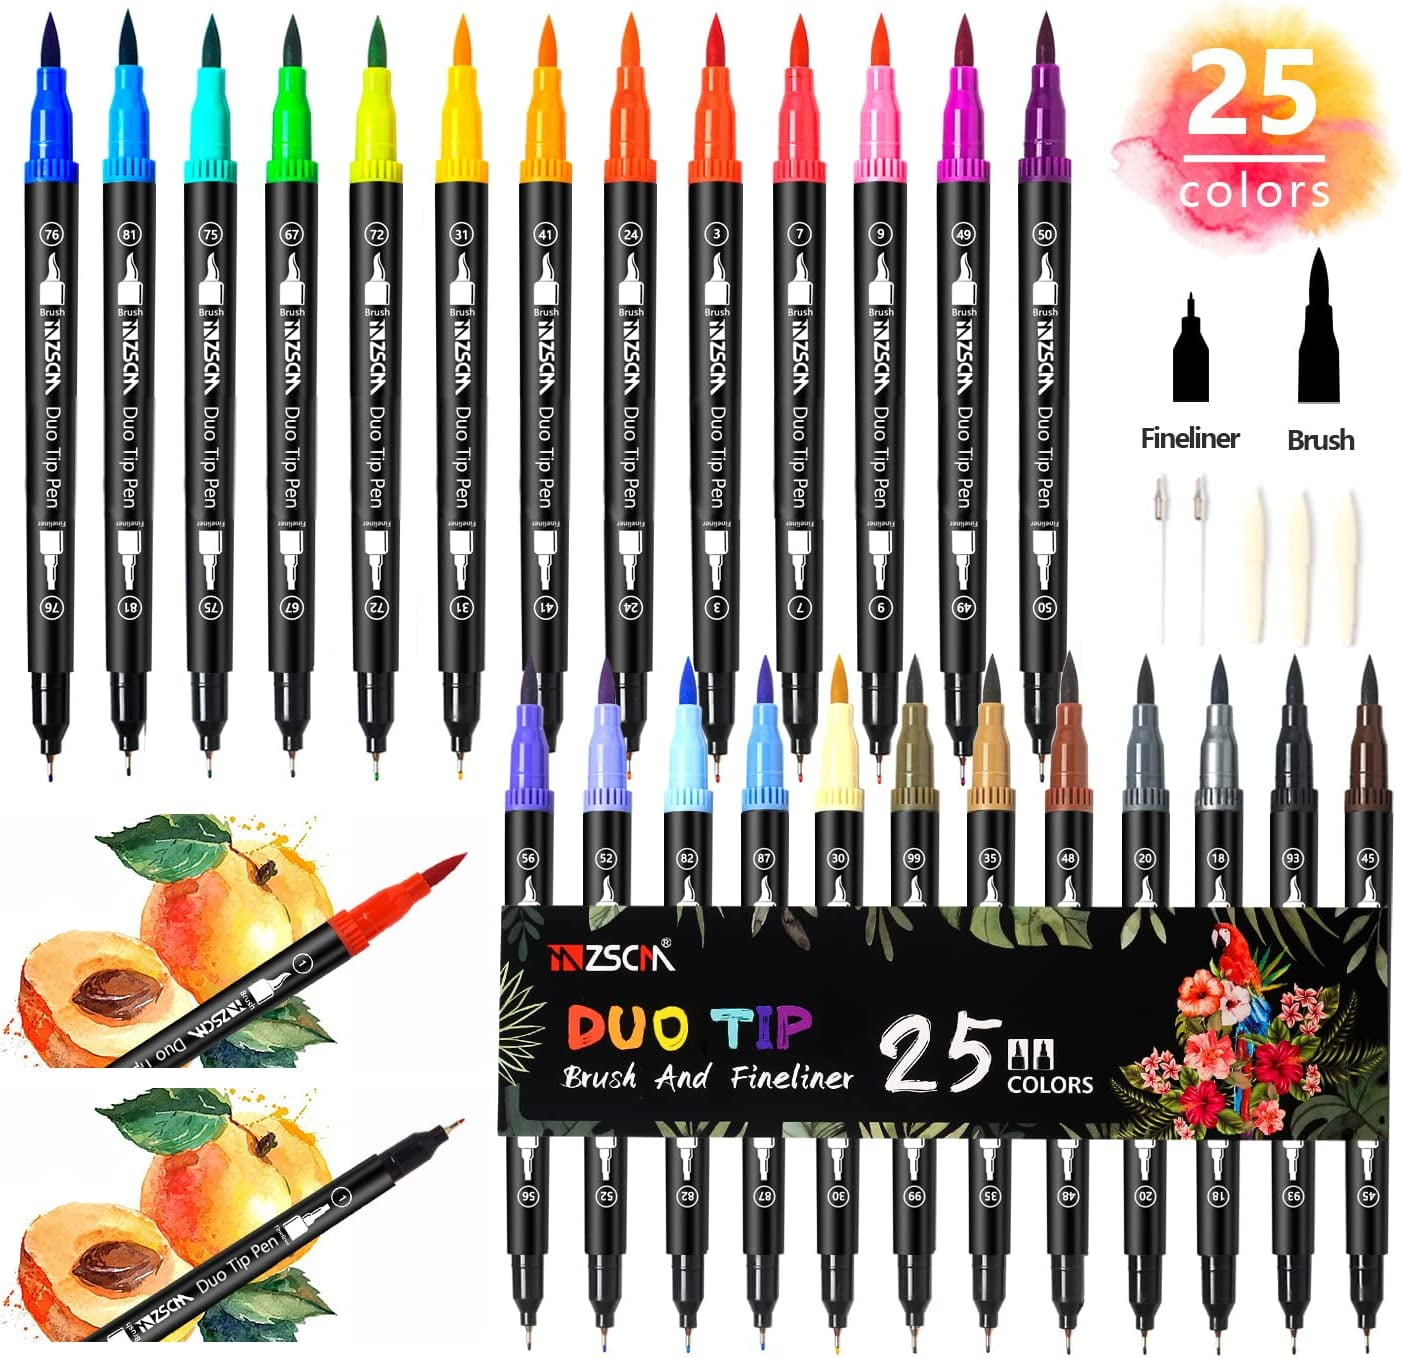  Coloring Markers Pens Set, Touch Write Brush Pen Color  Calligraphy Marker Pens Set Stationery Drawing School Supplies Gifts for  Women, Kid Adult Books Manga Artist Lettering Bullet Journal - 10Pcs 